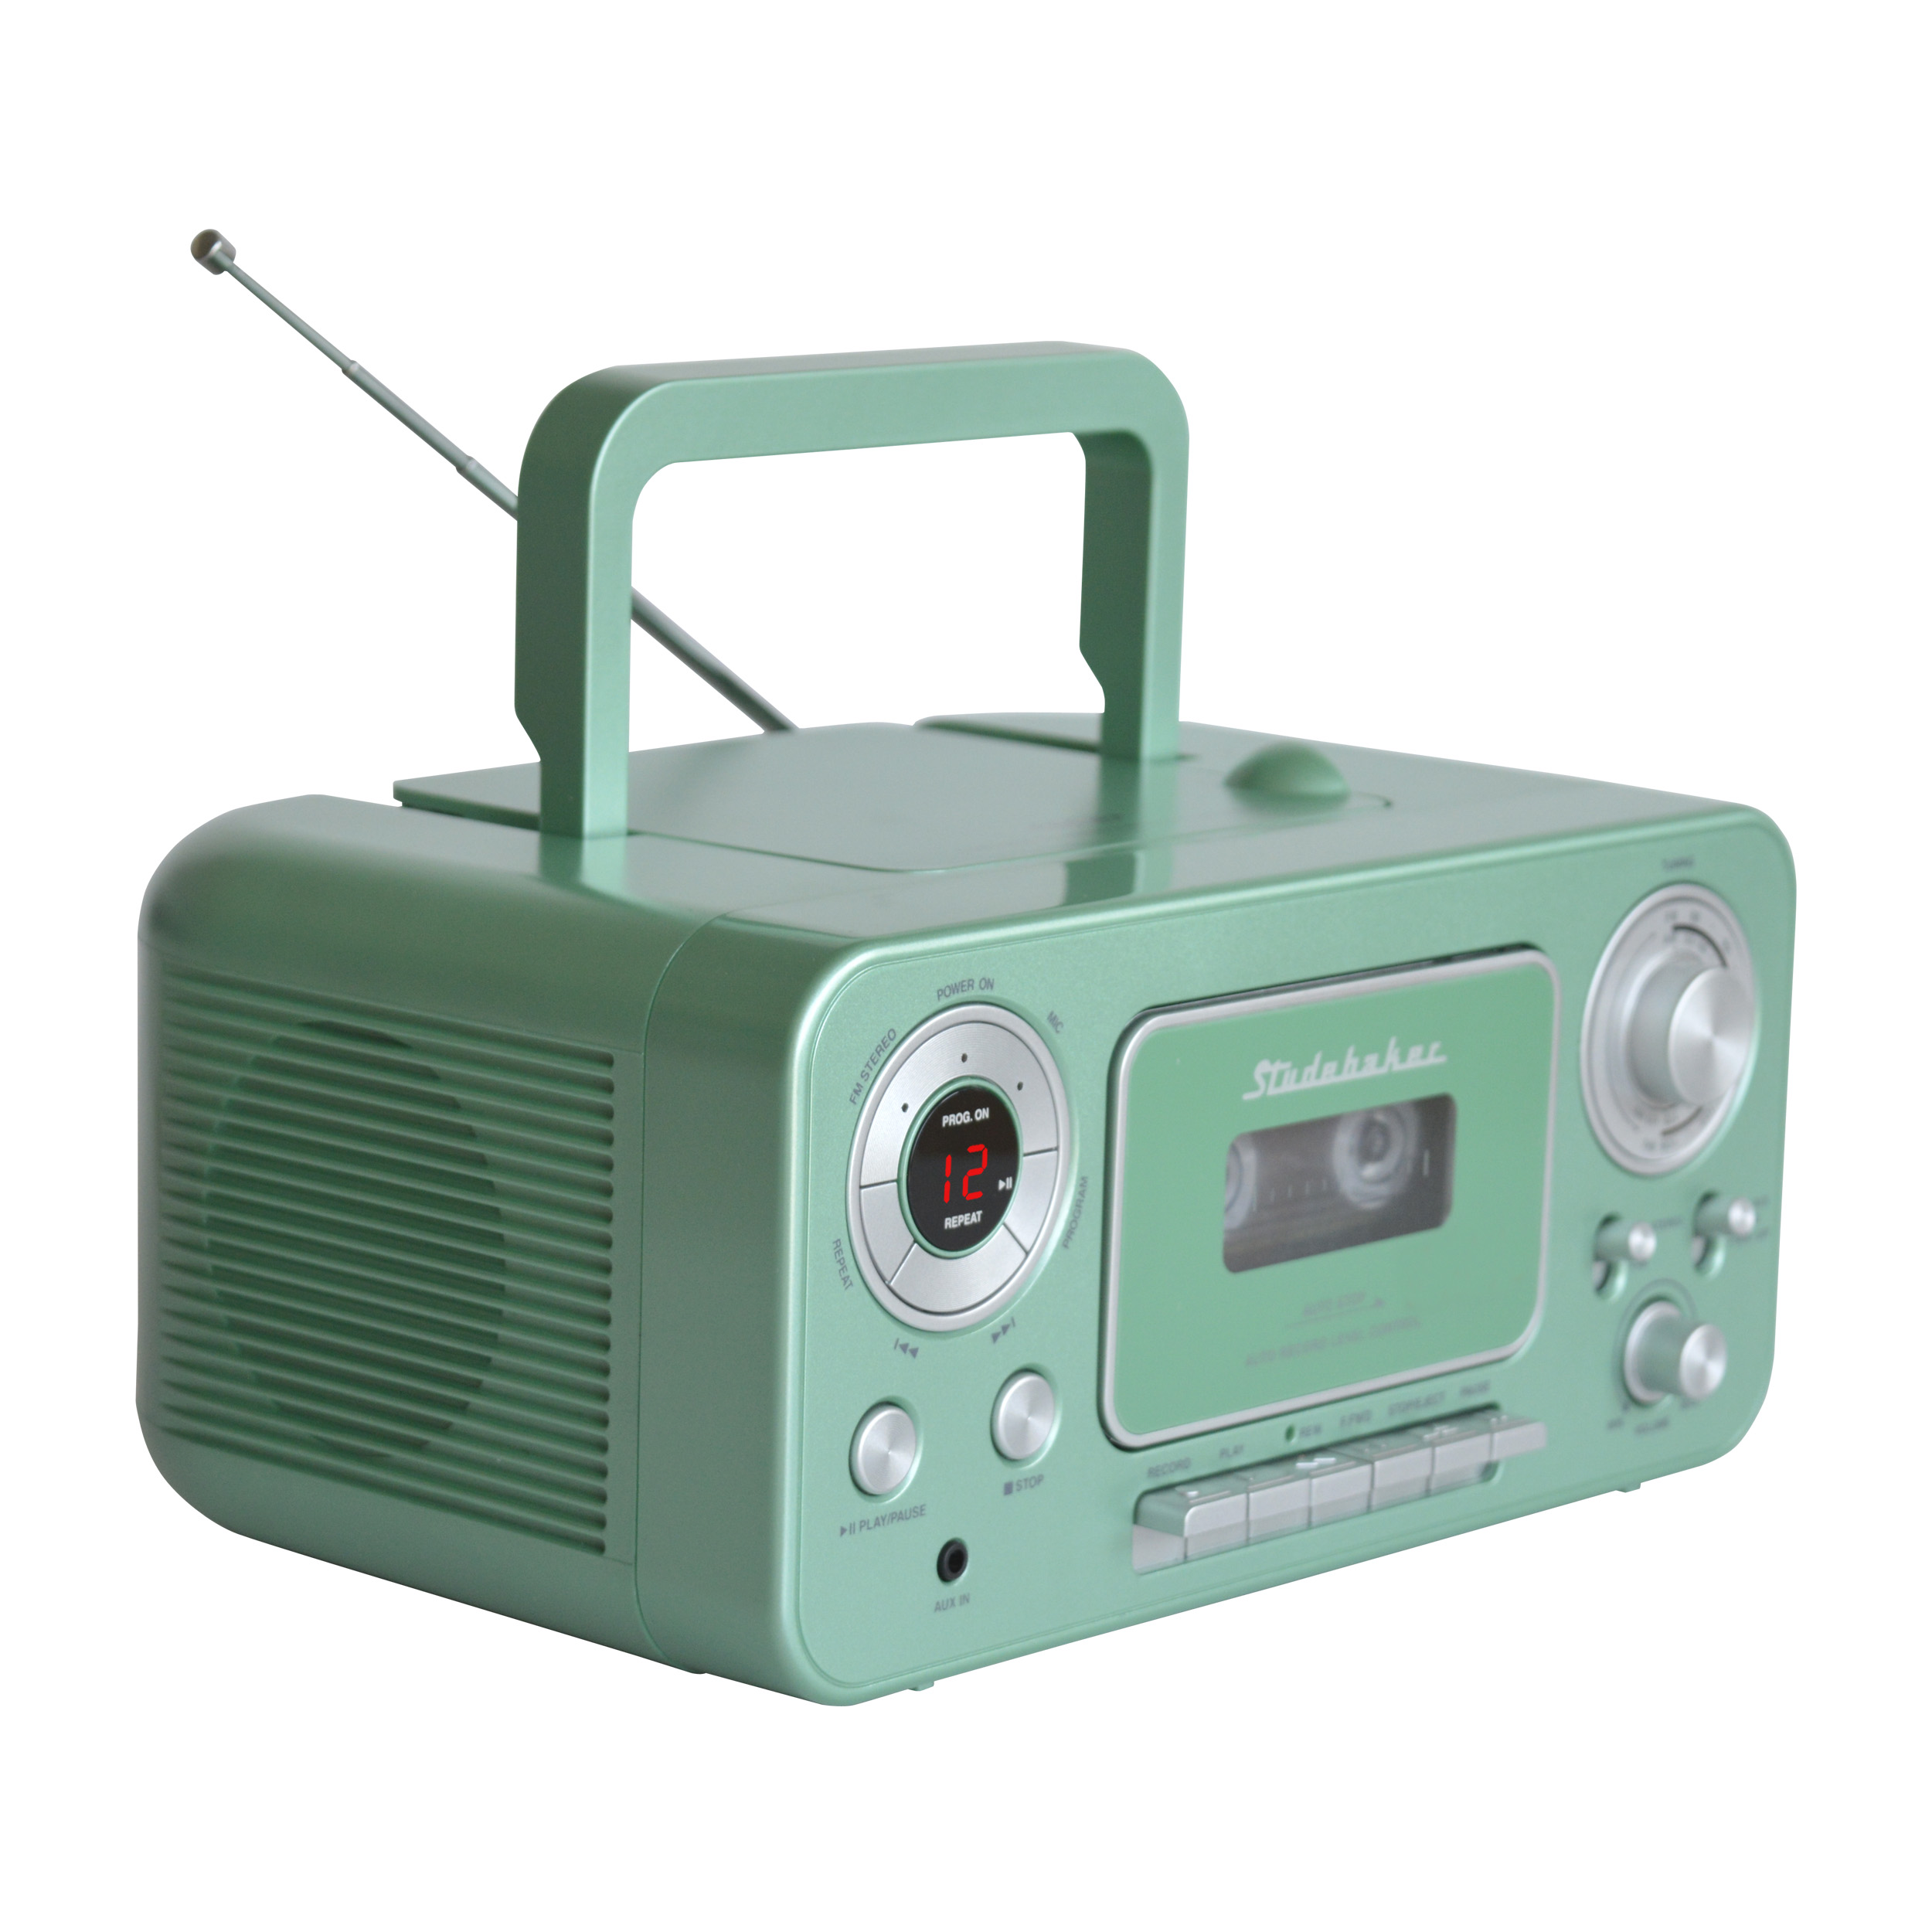 Portable Stereo CD Player with AM/FM Radio and Cassette Player/Recorder - image 4 of 5